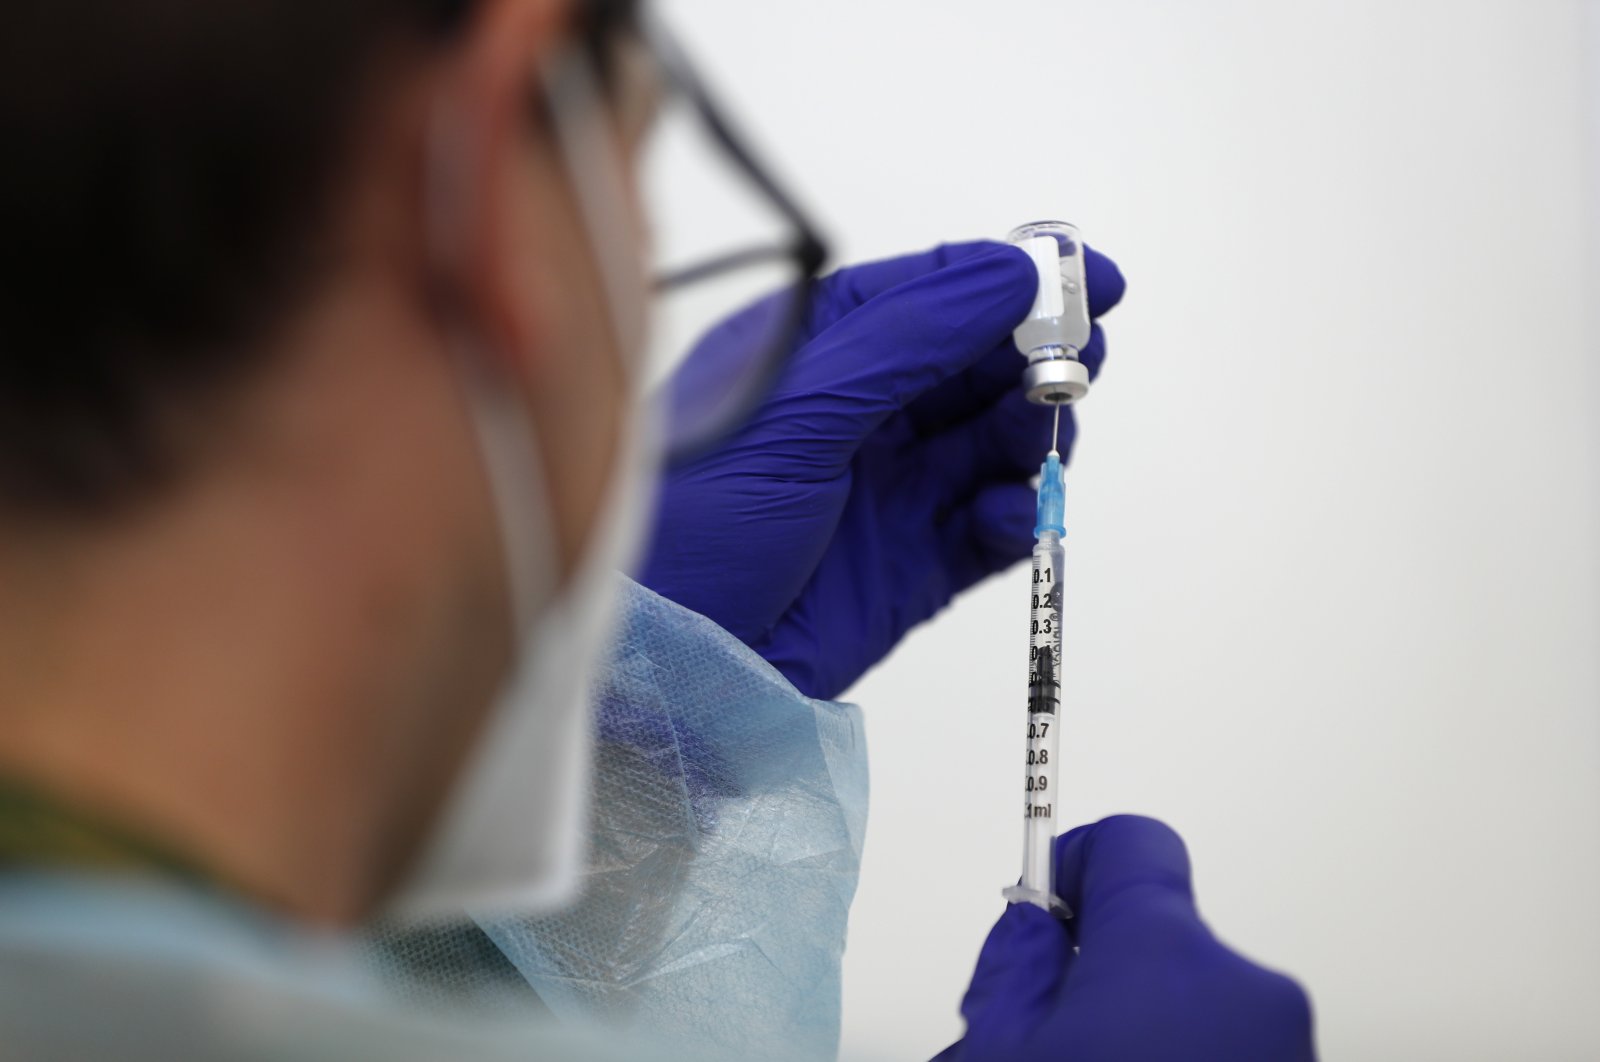 A nurse prepares doses of the Johnson & Johnson vaccine at an inoculation center operated by the Portuguese armed forces at Lisbon University's sports stadium, Lisbon, Portugal, June 23, 2021. (AP Photo)